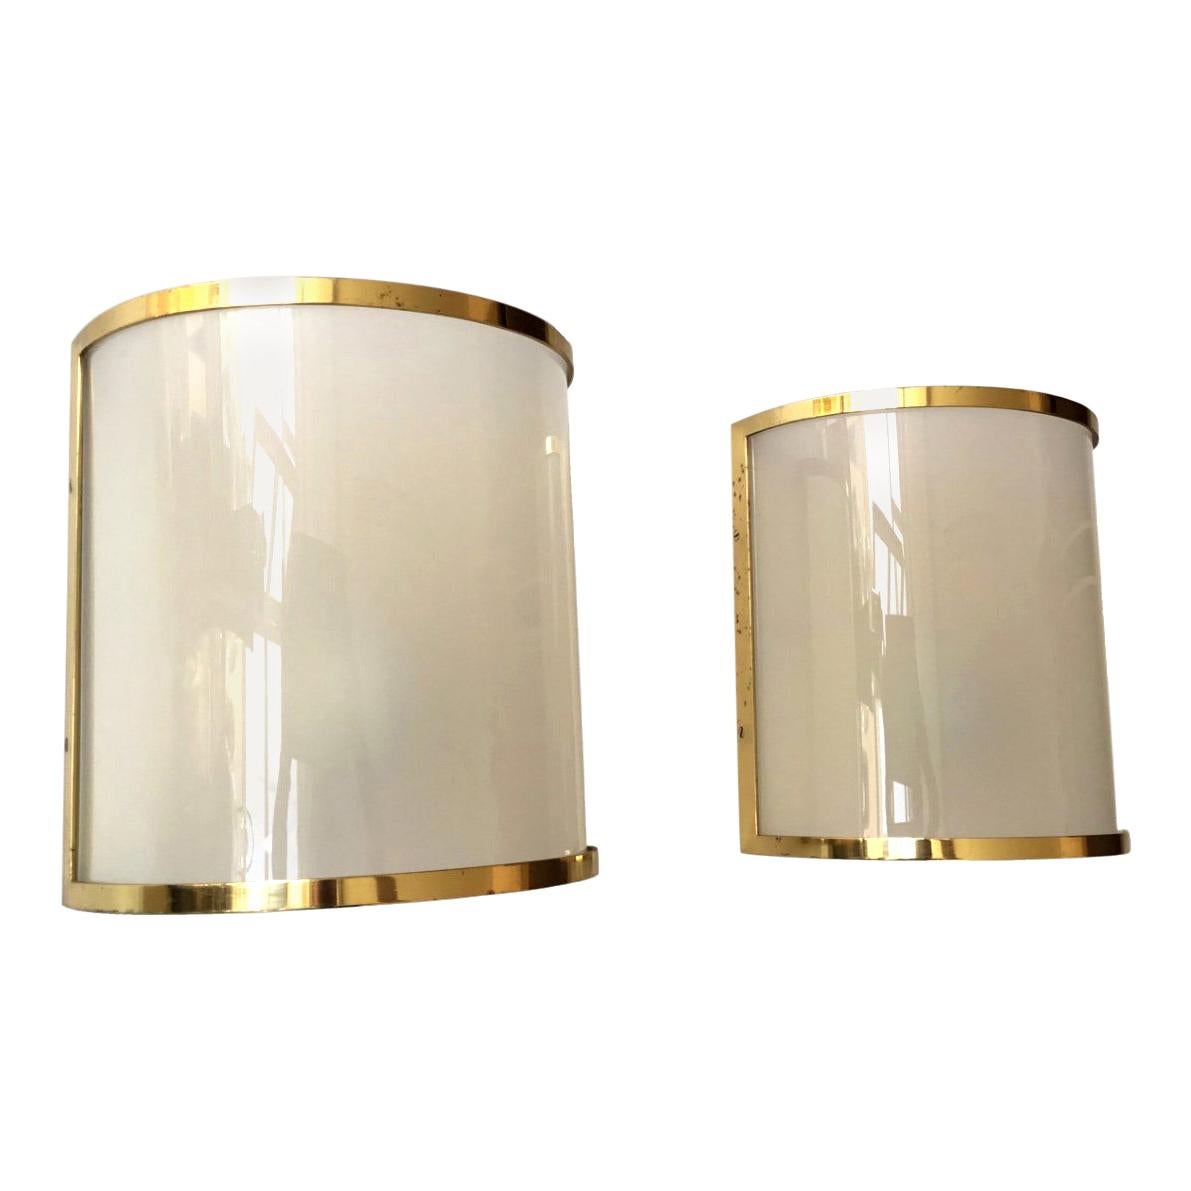 Spanish Lucite and Brass Wall Sconces by Metalarte, 1970s